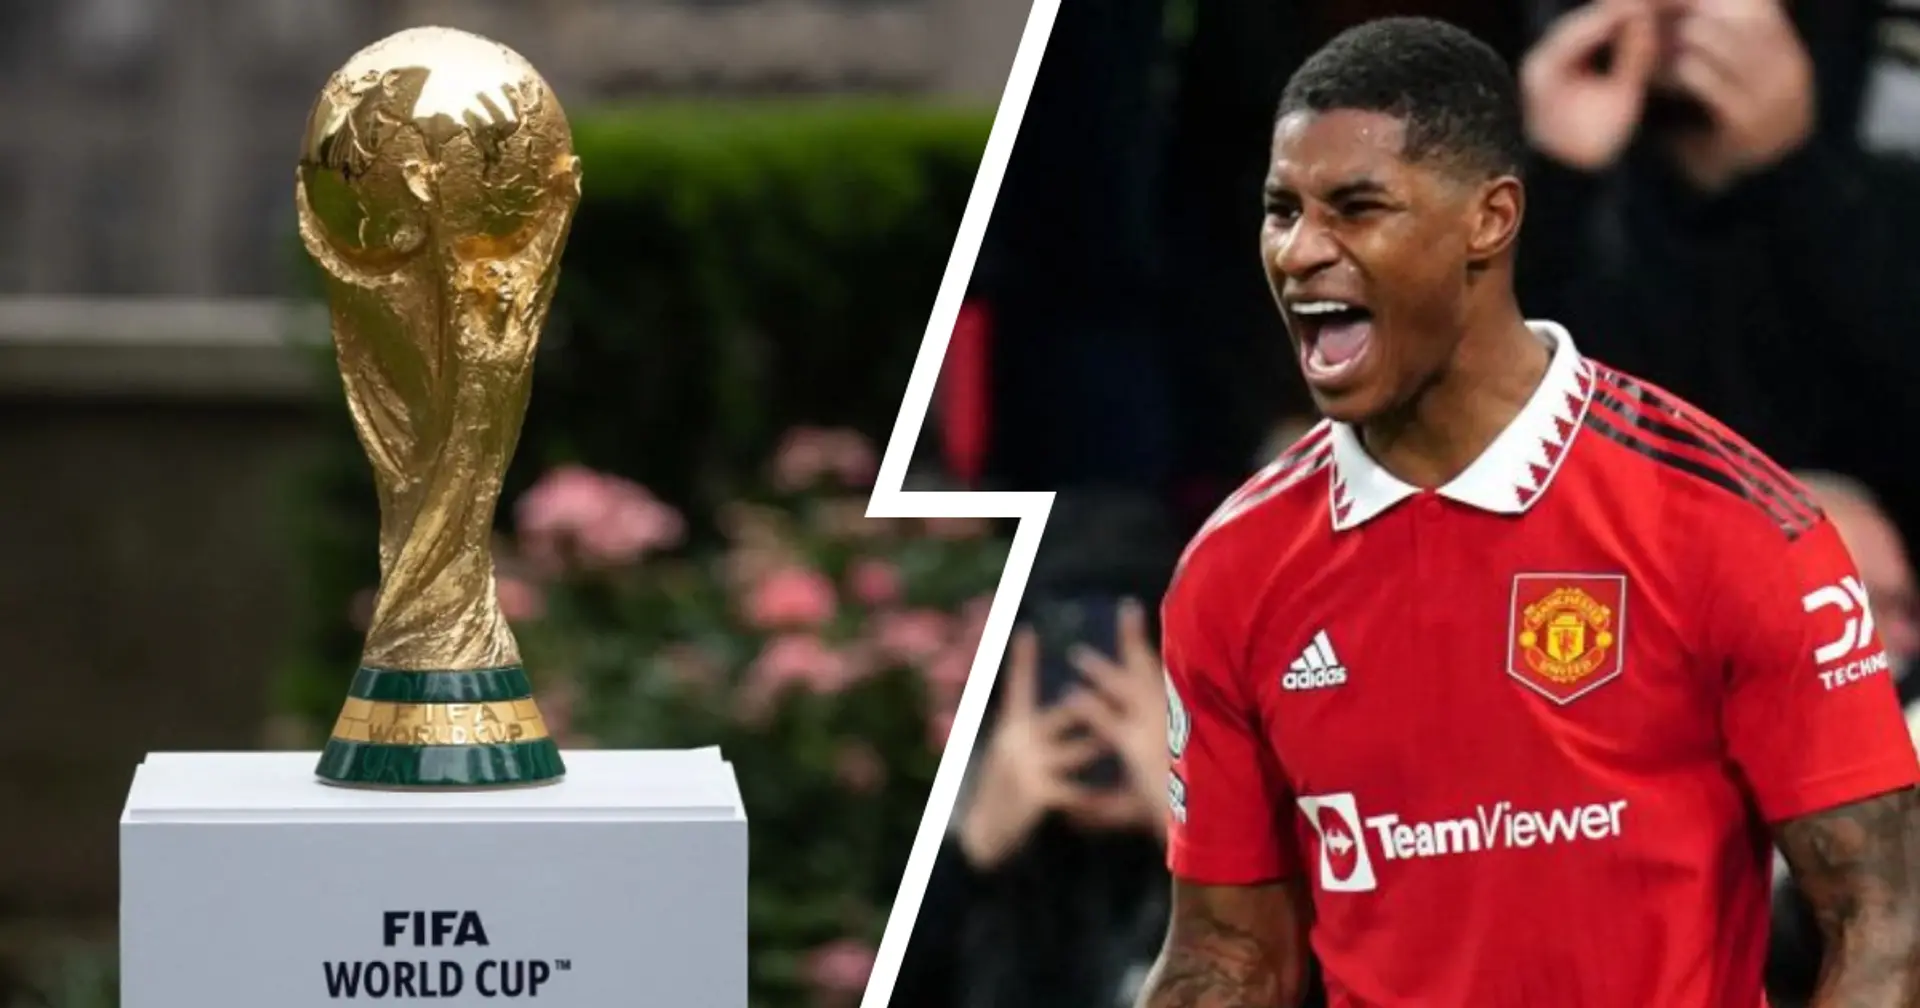 Rashford backed for World Cup place & 3 more under-radar Man United stories